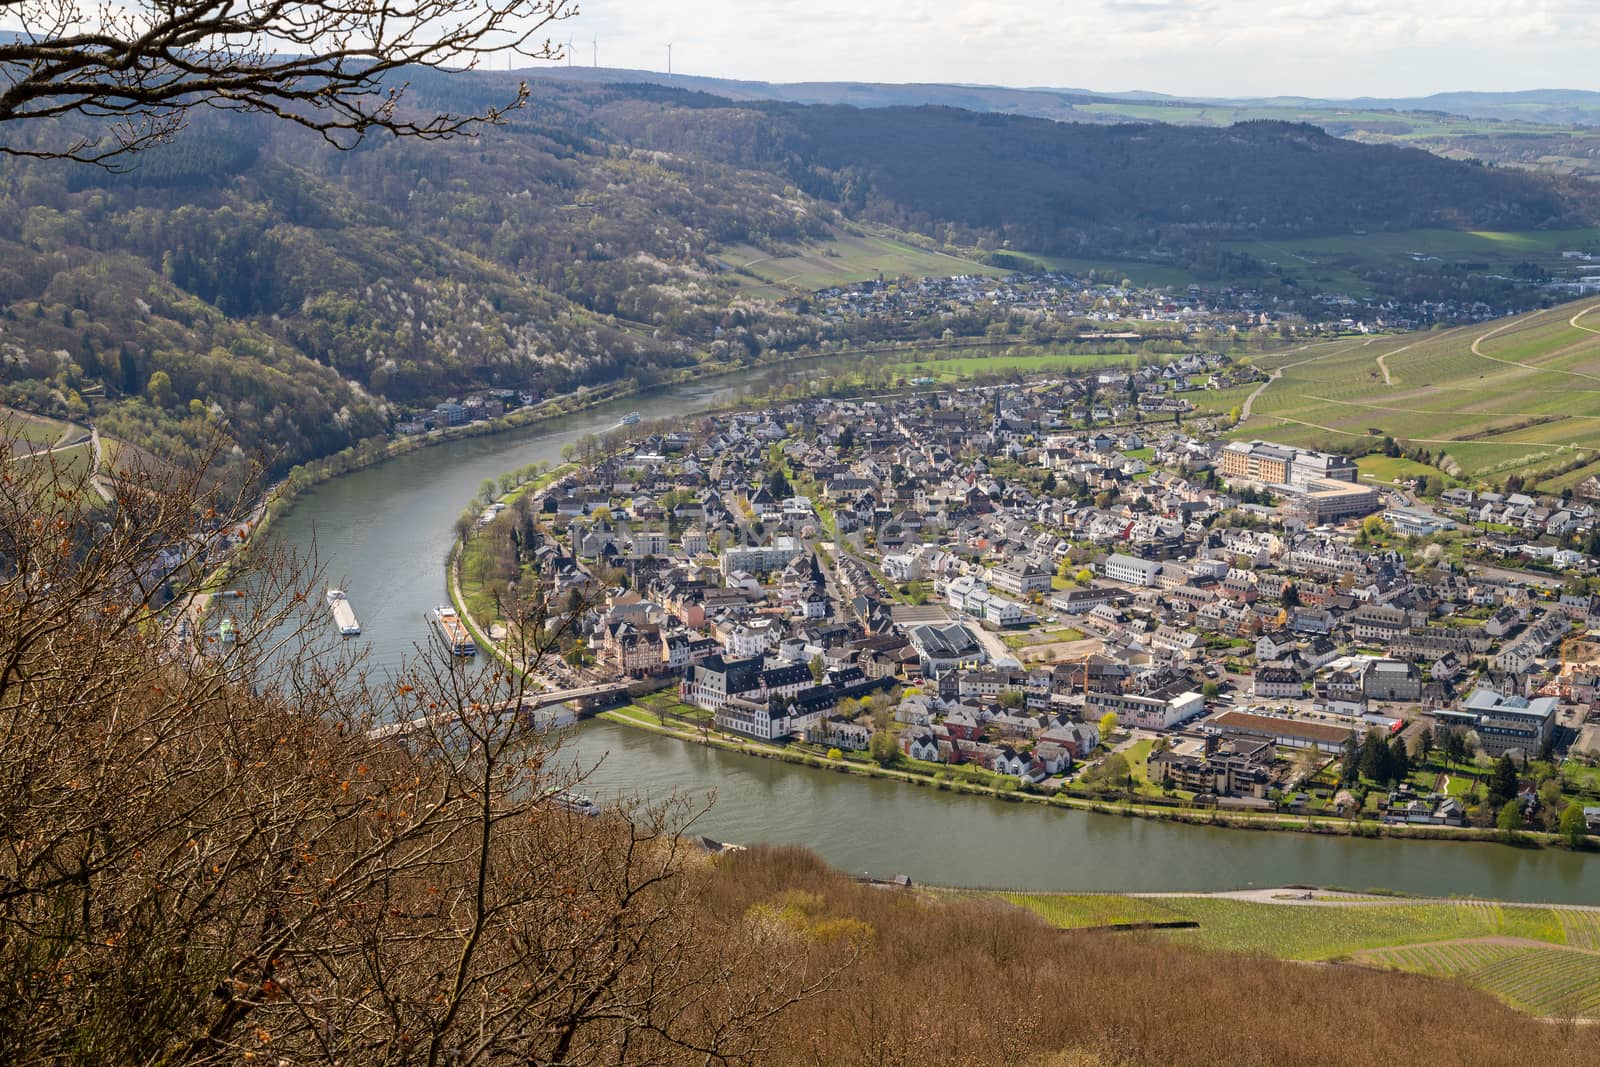 Panoramic view on the valley of the river Moselle and the city Bernkastel-Kues